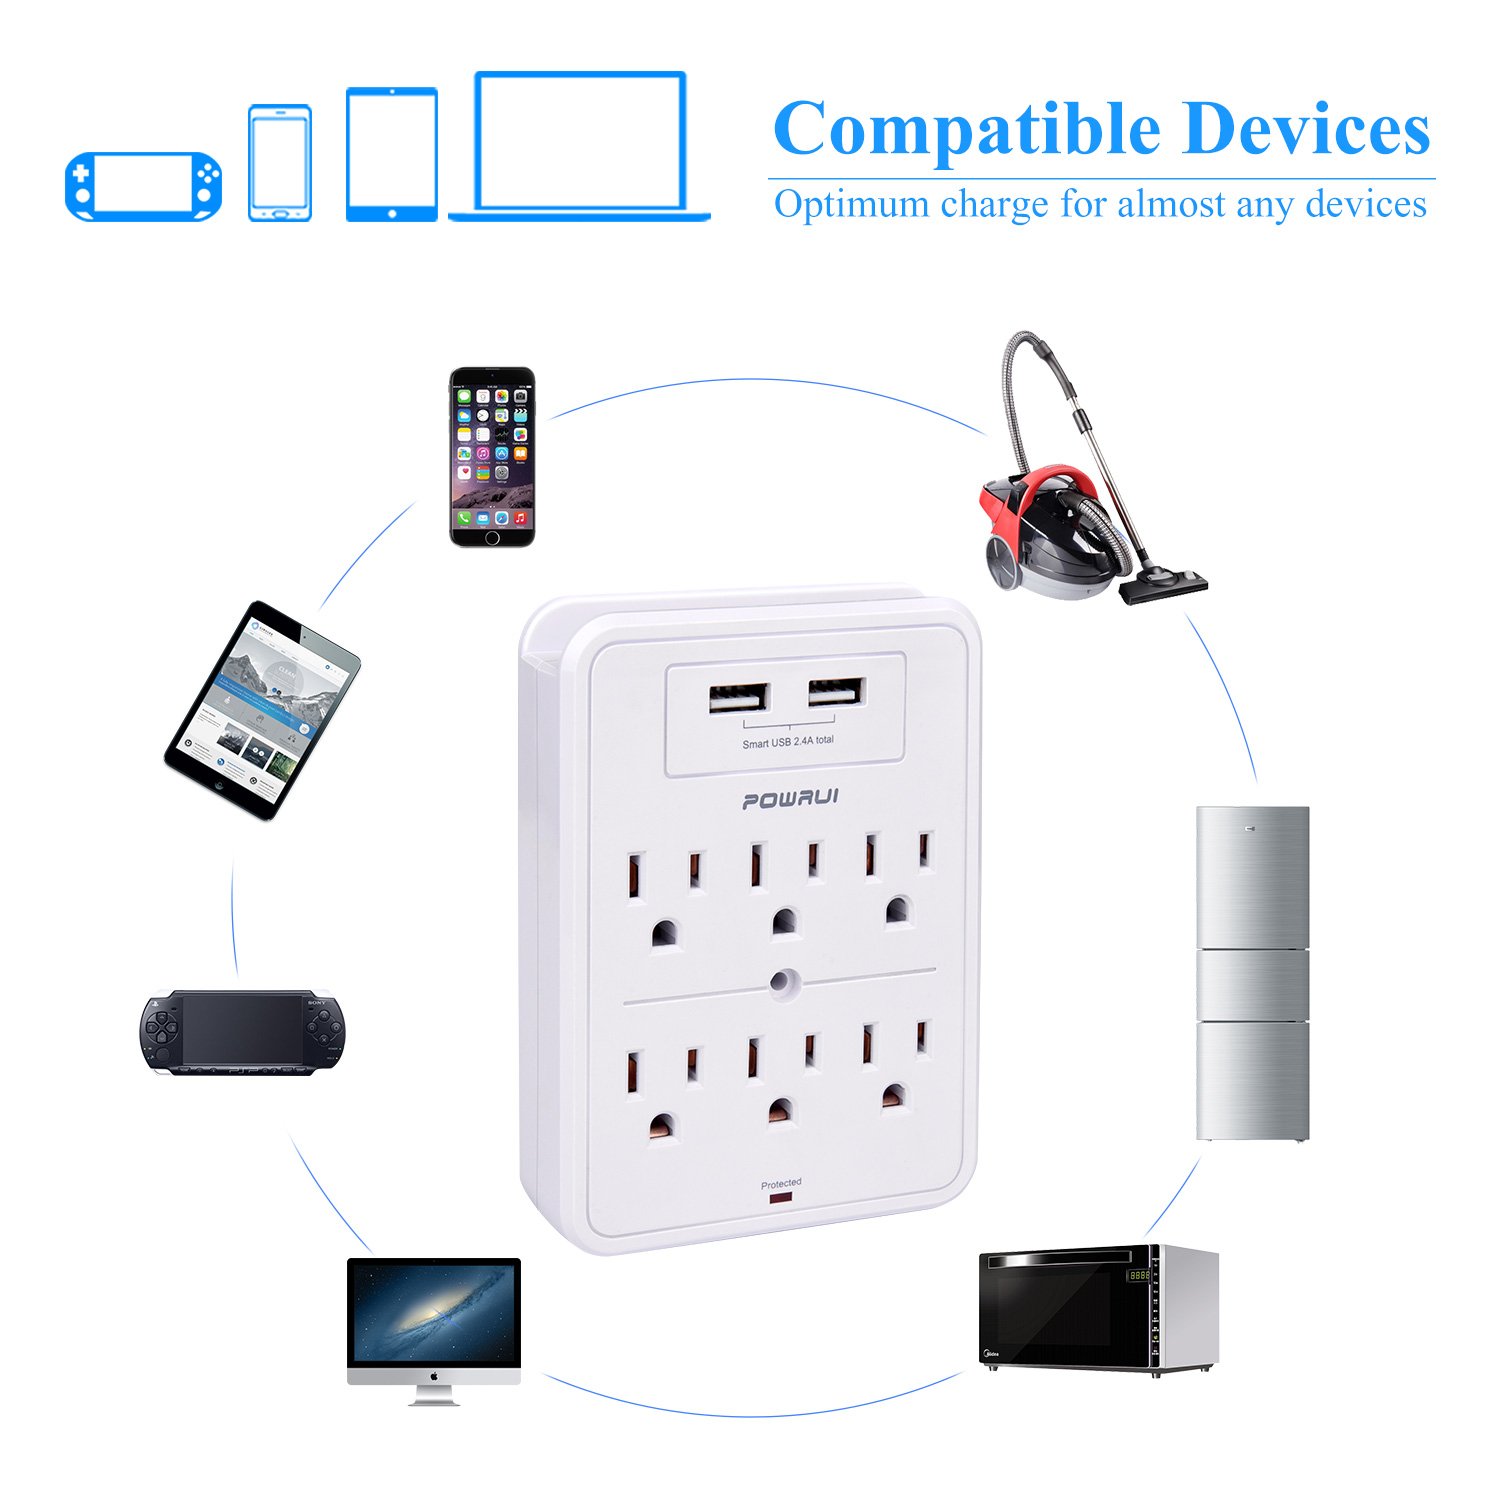 POWRUI Surge Protector, USB Wall Charger with 2 USB Charging Ports(Smart 2.4A Total), 6-Outlet Extender and Top Phone Holder for Your Cell Phone, White, ETL Listed